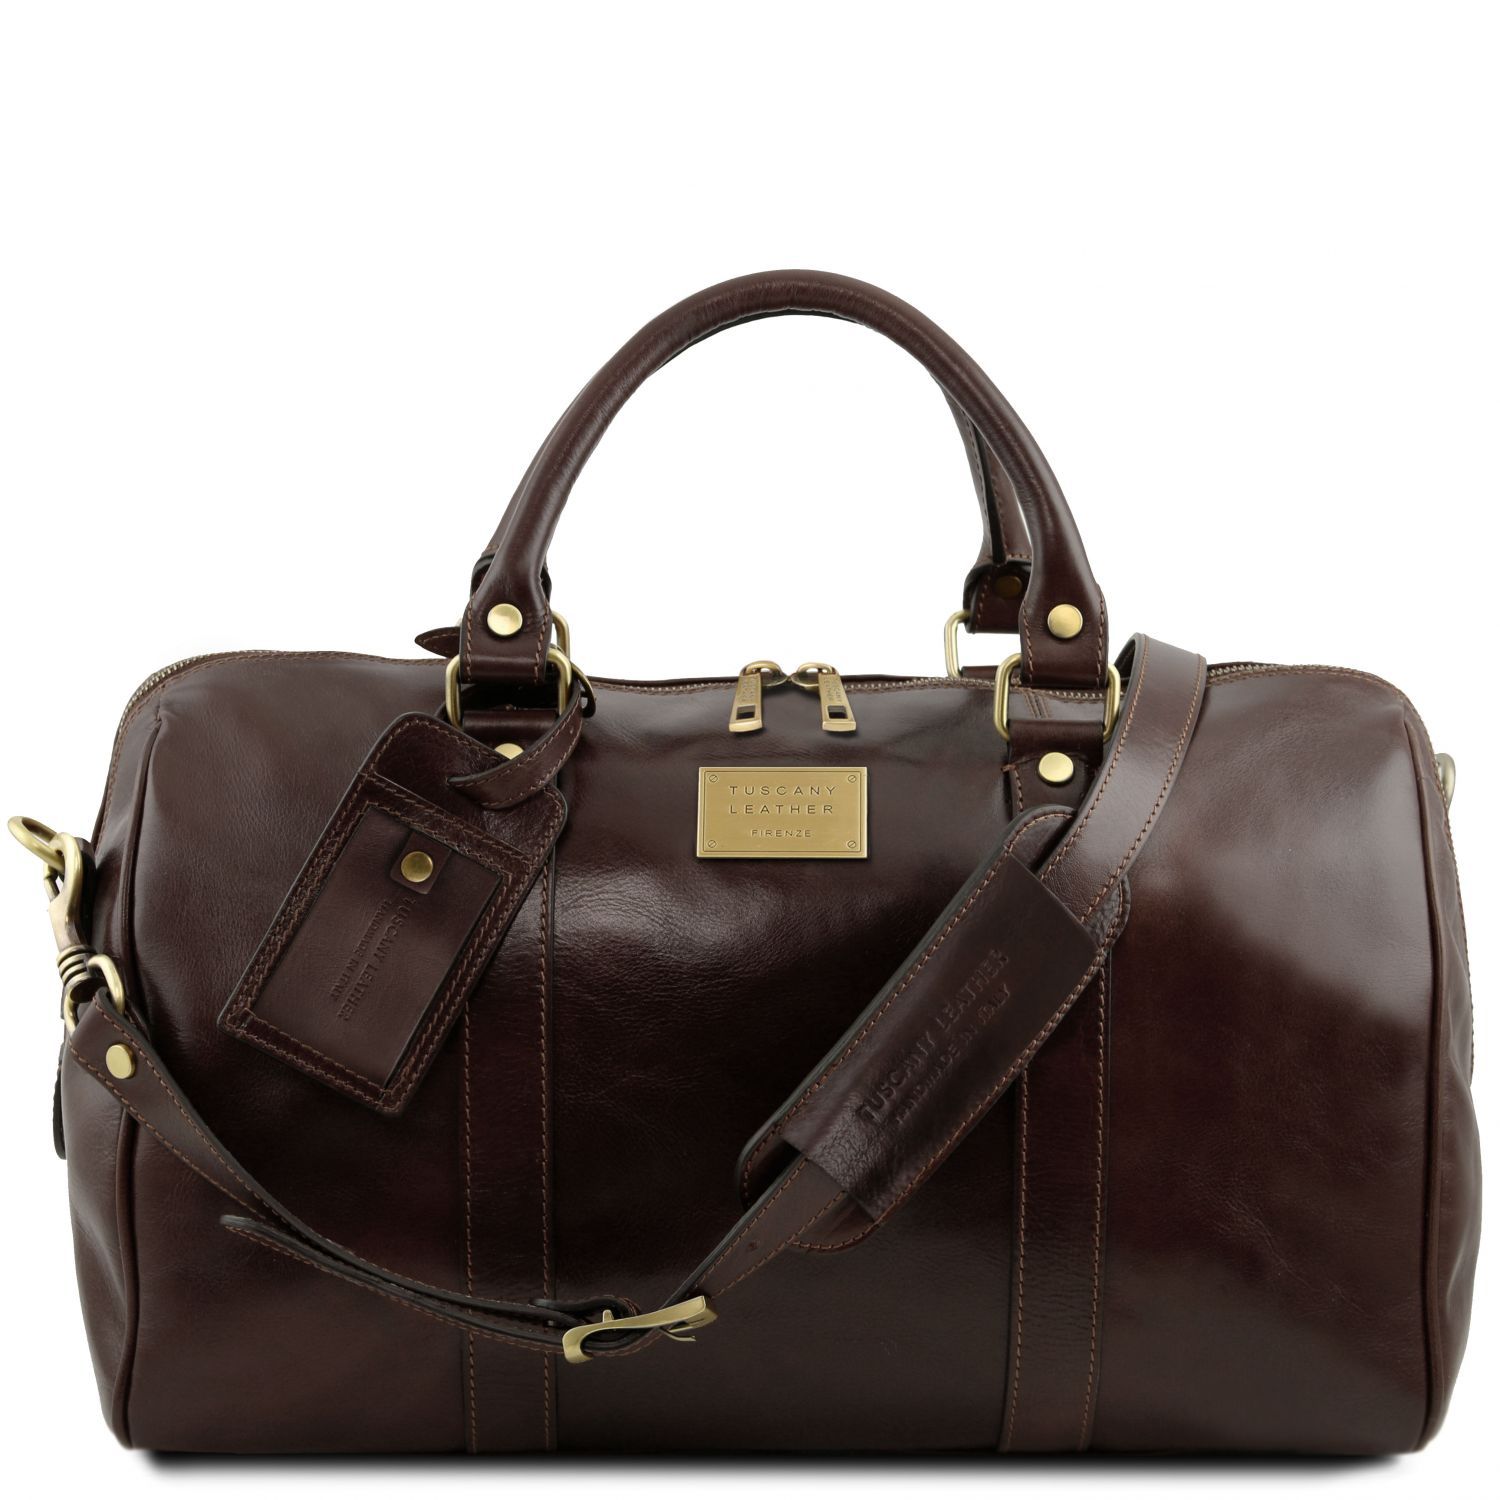 Travel Leather Duffle Bag with Pocket on The Back Side - Small Size ...